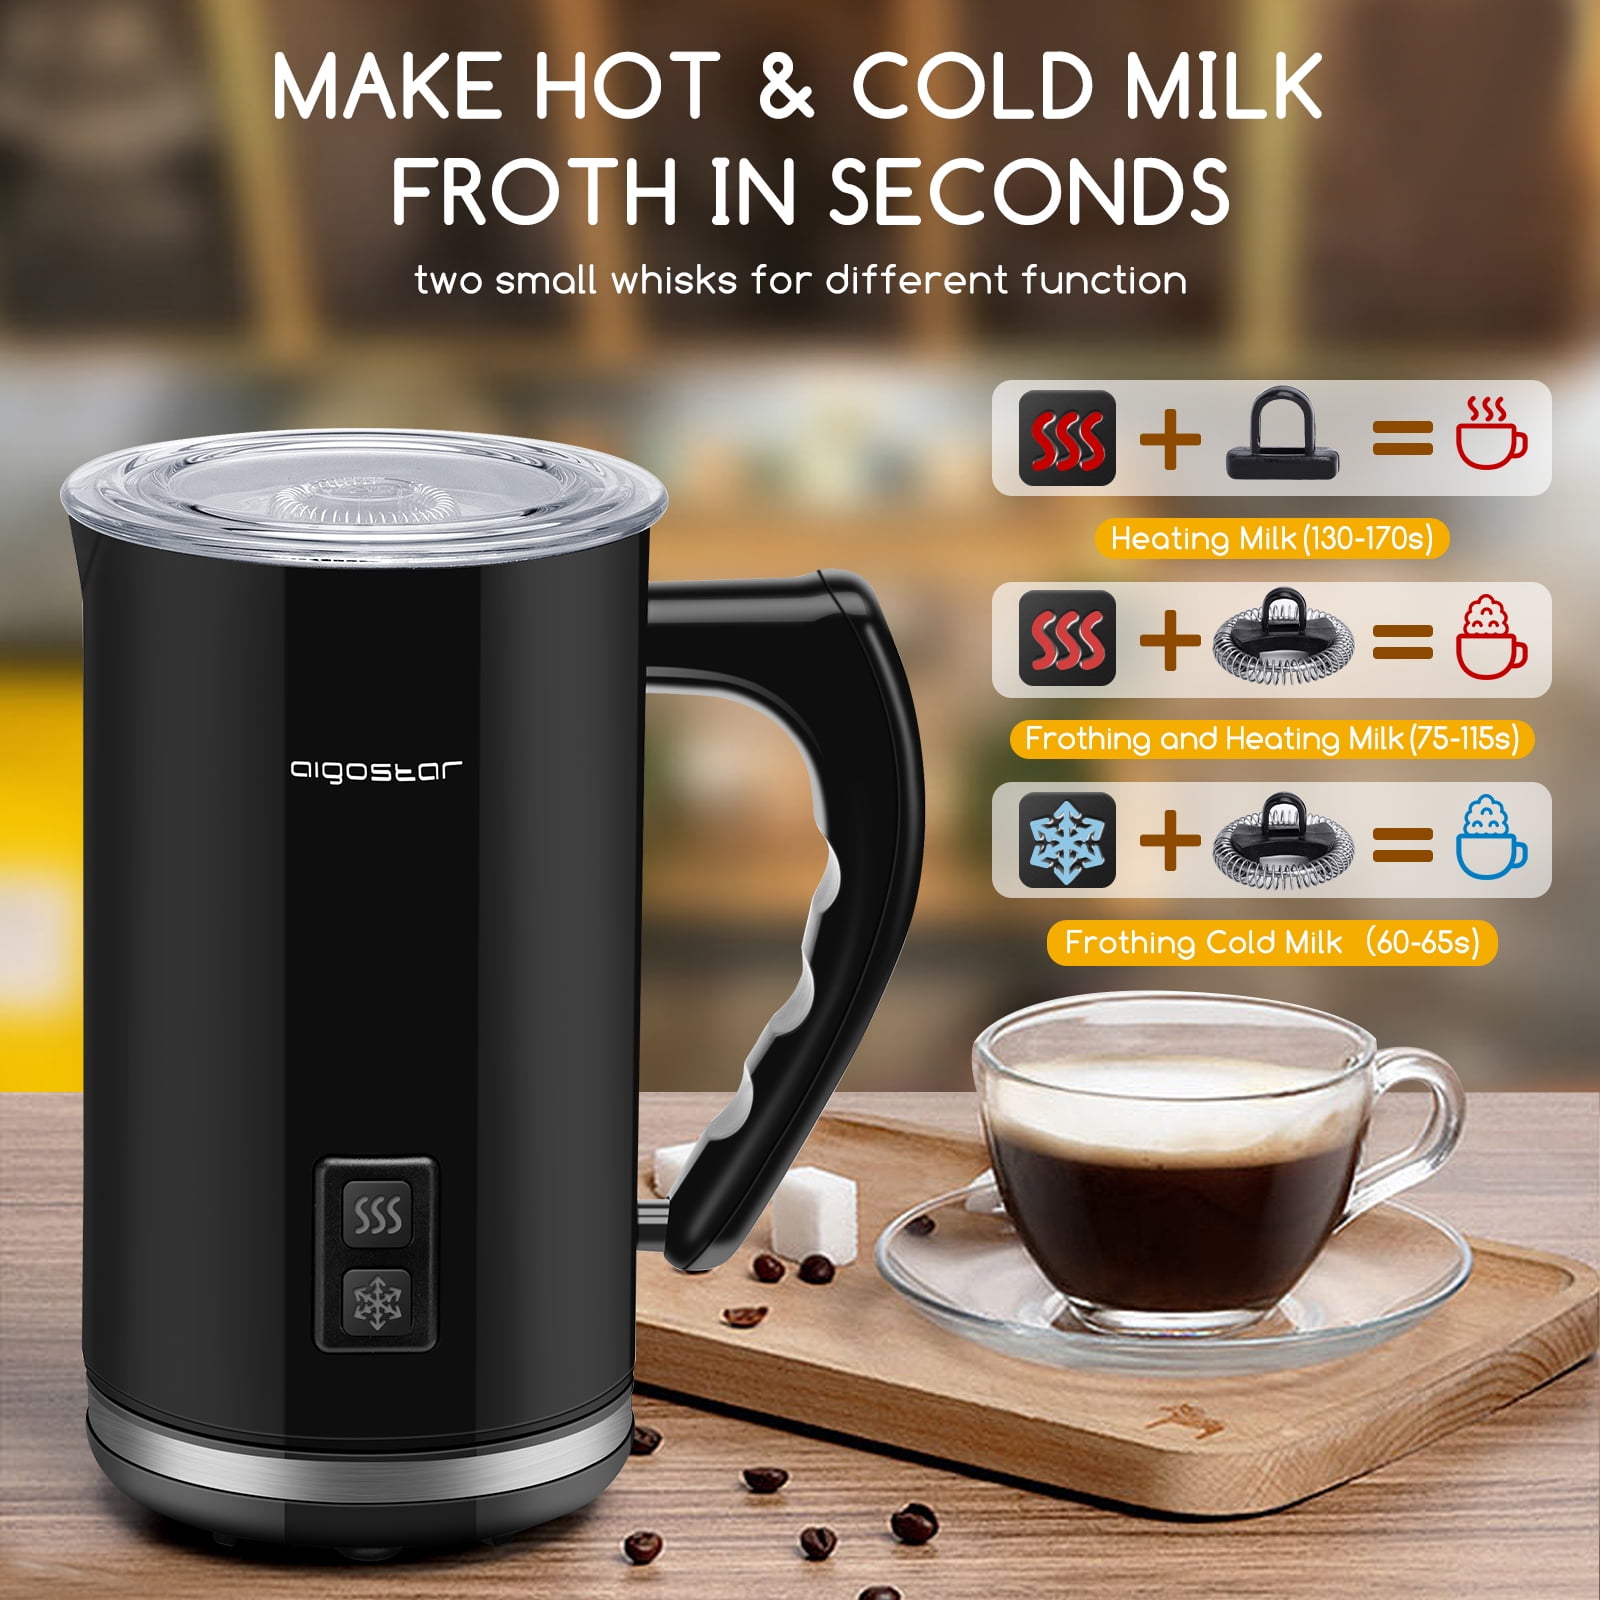 Crowdstage Milk Frother, 4-in-1 Electric Milk Steamer, Hot or Cold Foam  Maker and Drink Warmer for Cappuccinos, Lattes, Cold Brew and Iced Coffees,  8.1 oz/240ml, Black 